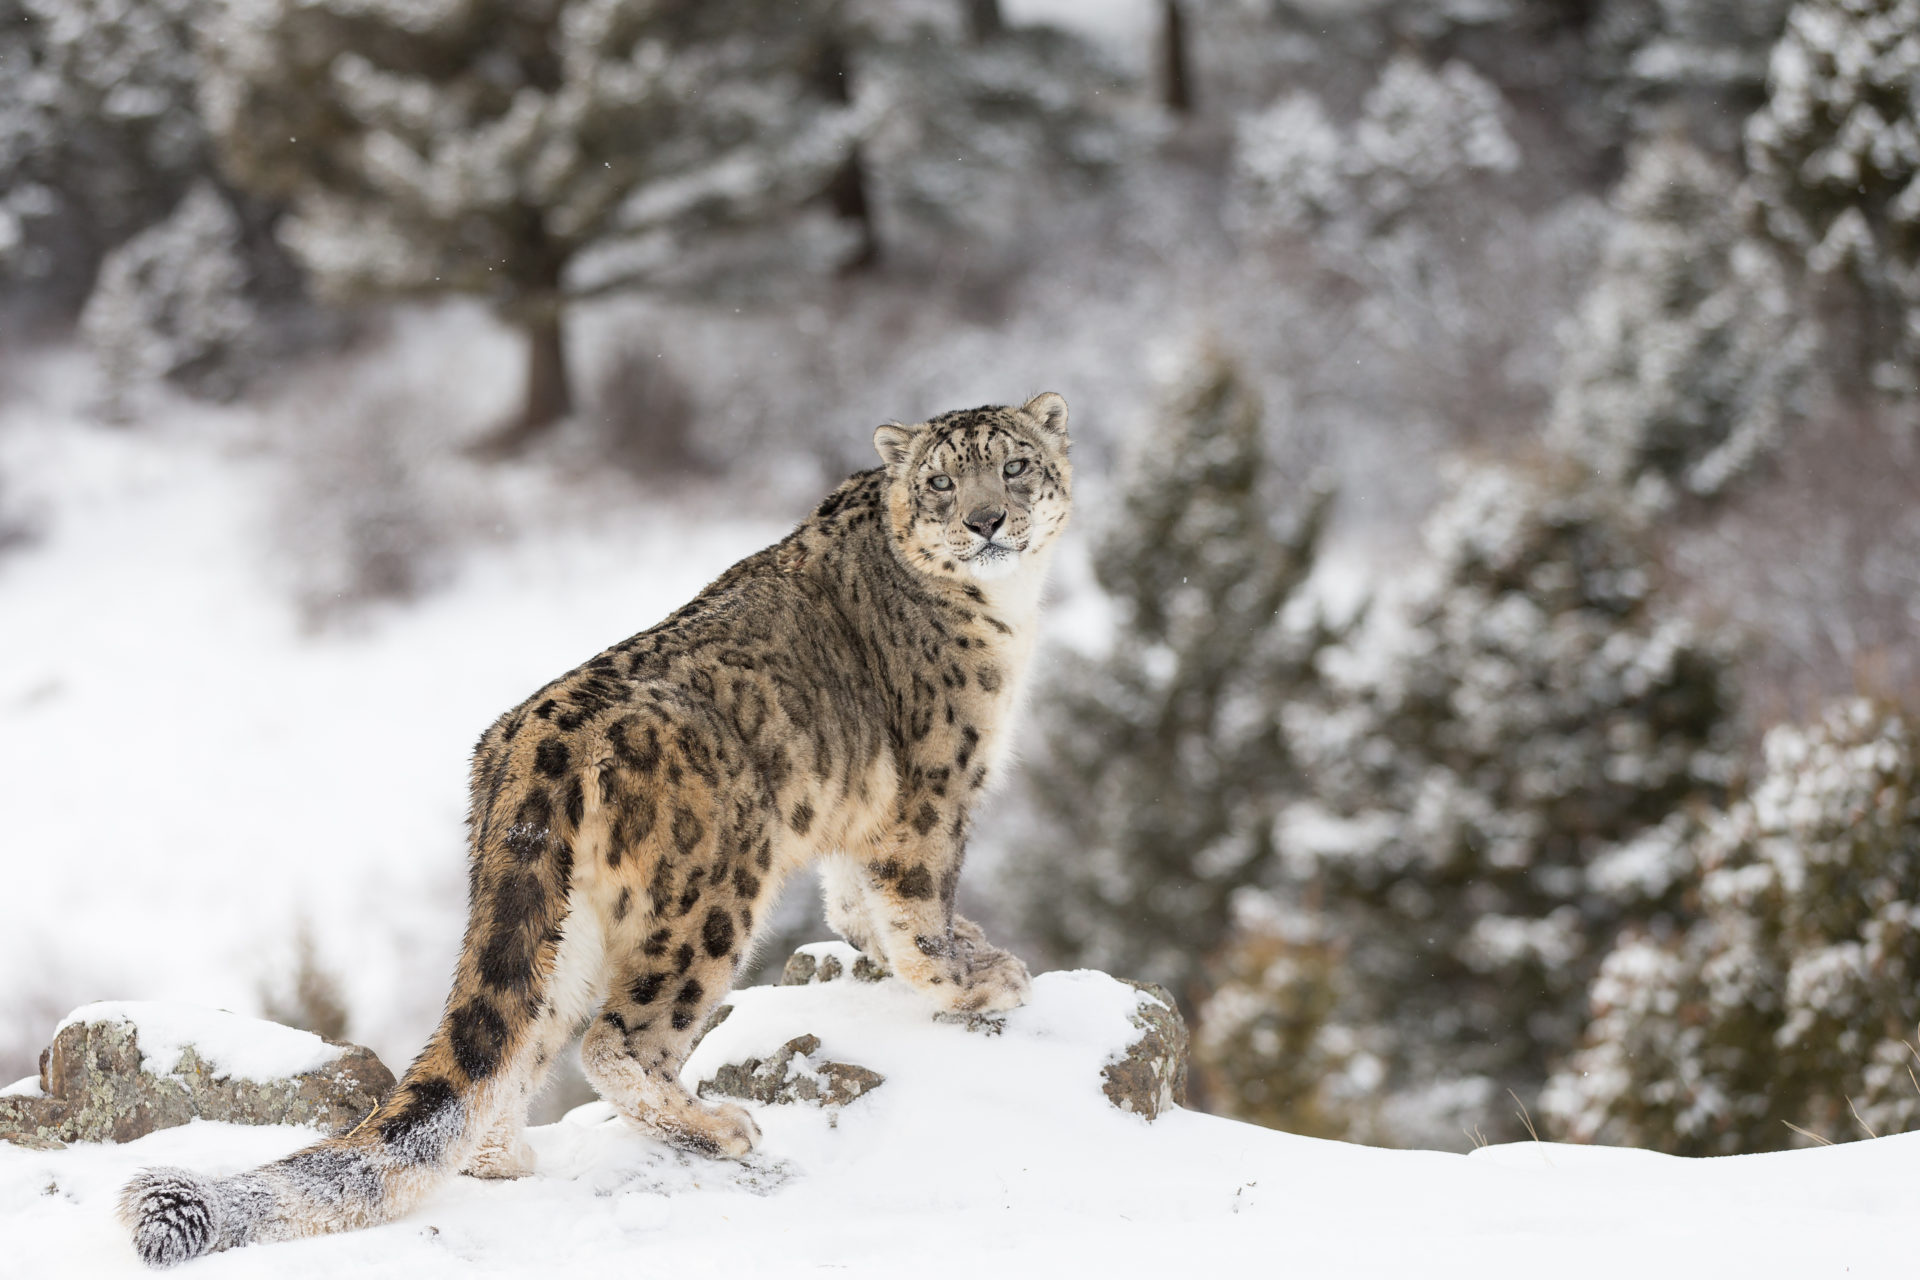 Snow Leopard, HD wallpapers, Zoey Anderson's post, Stunning imagery, 1920x1280 HD Desktop